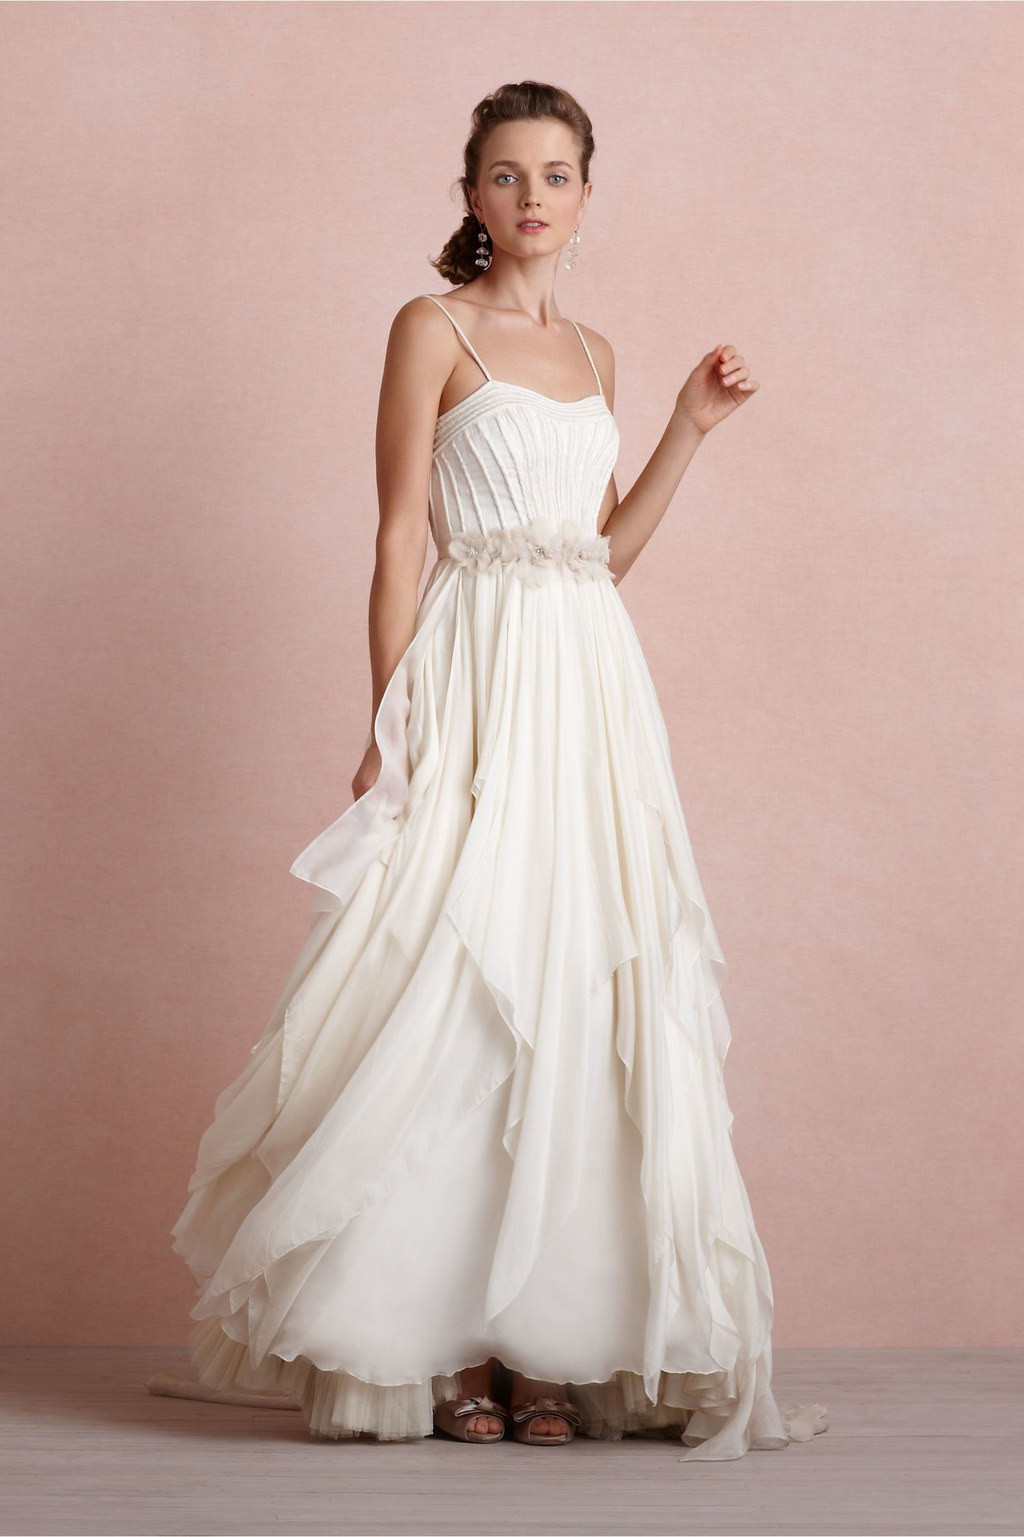 Sale Wedding Dresses
 7 BHLDN Wedding Dresses That Will Be on Super Sale for